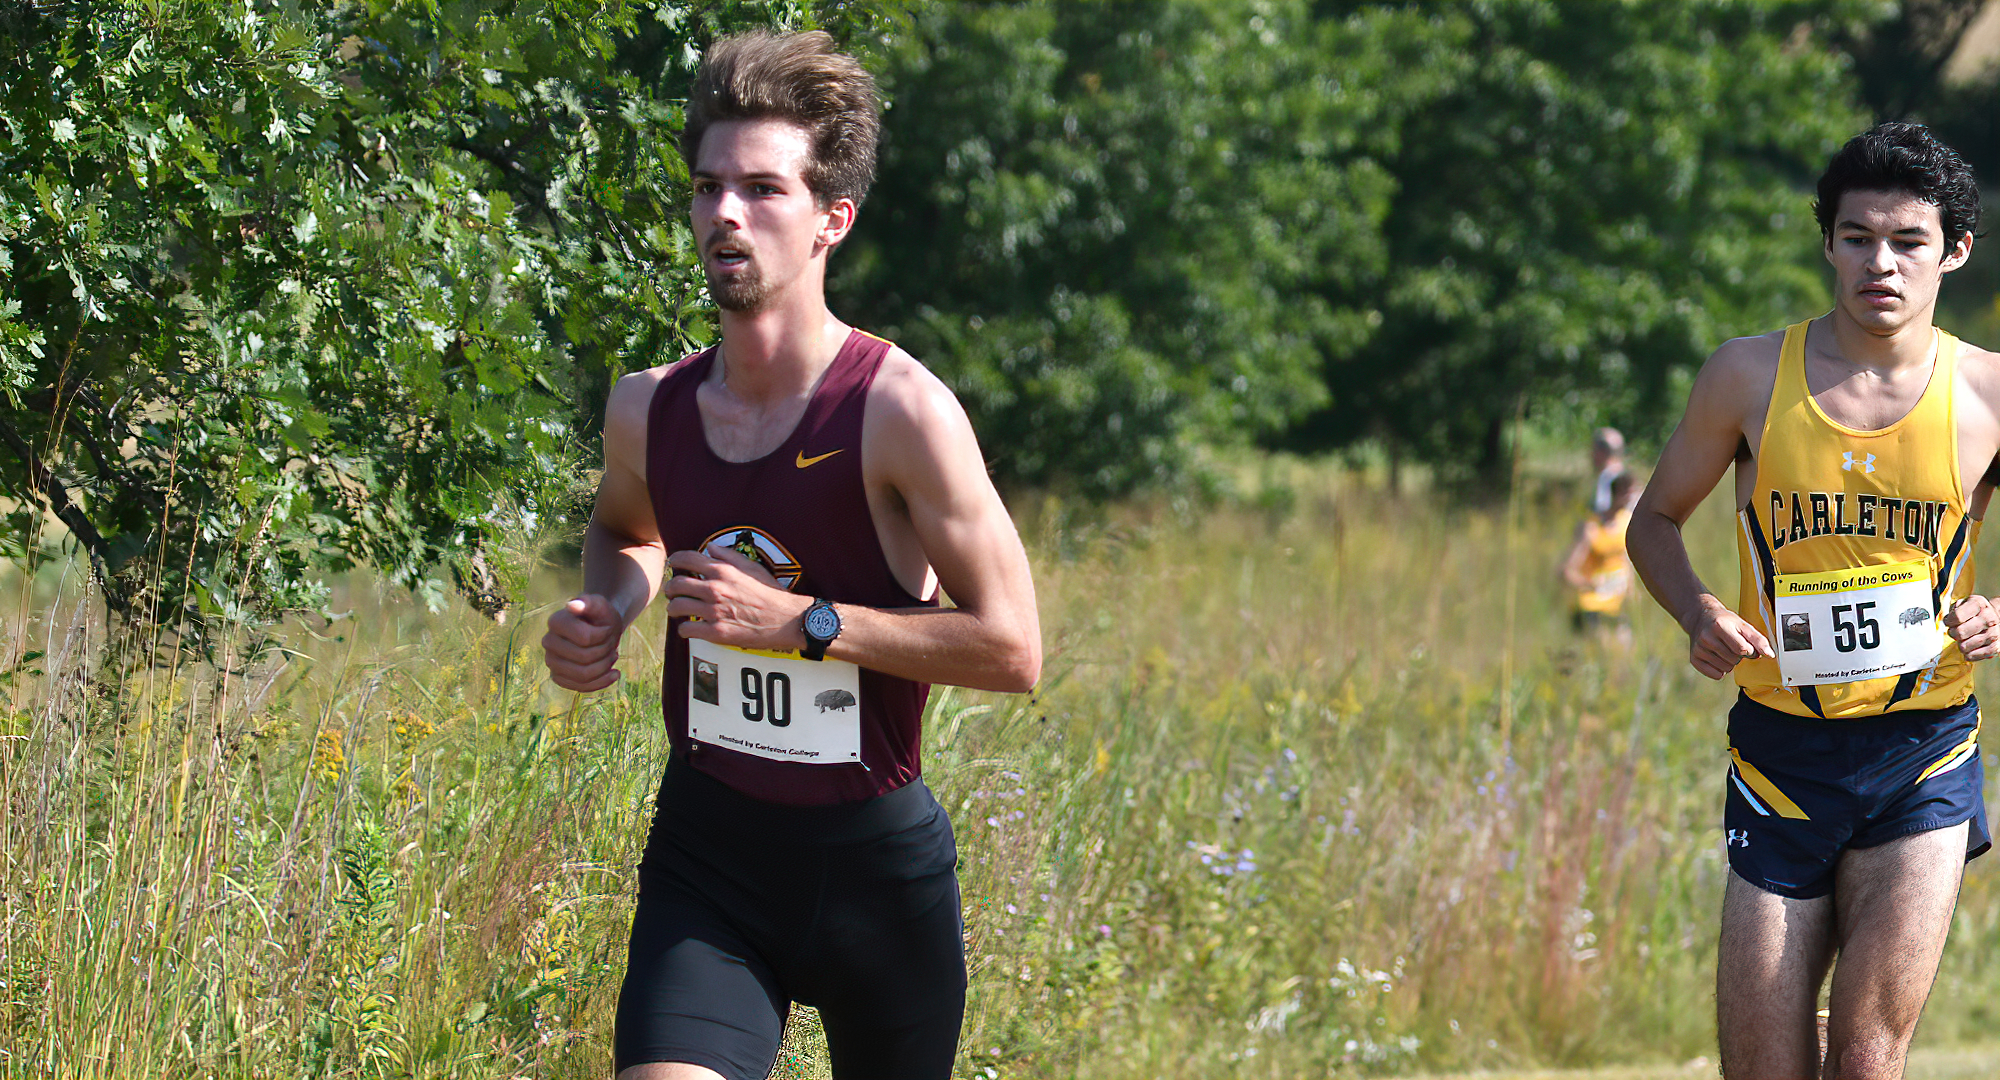 Senior Tanner Olson pulls away from a Carleton runner at the Running of the Cows Meet. (Photo courtesy of Carleton SID)